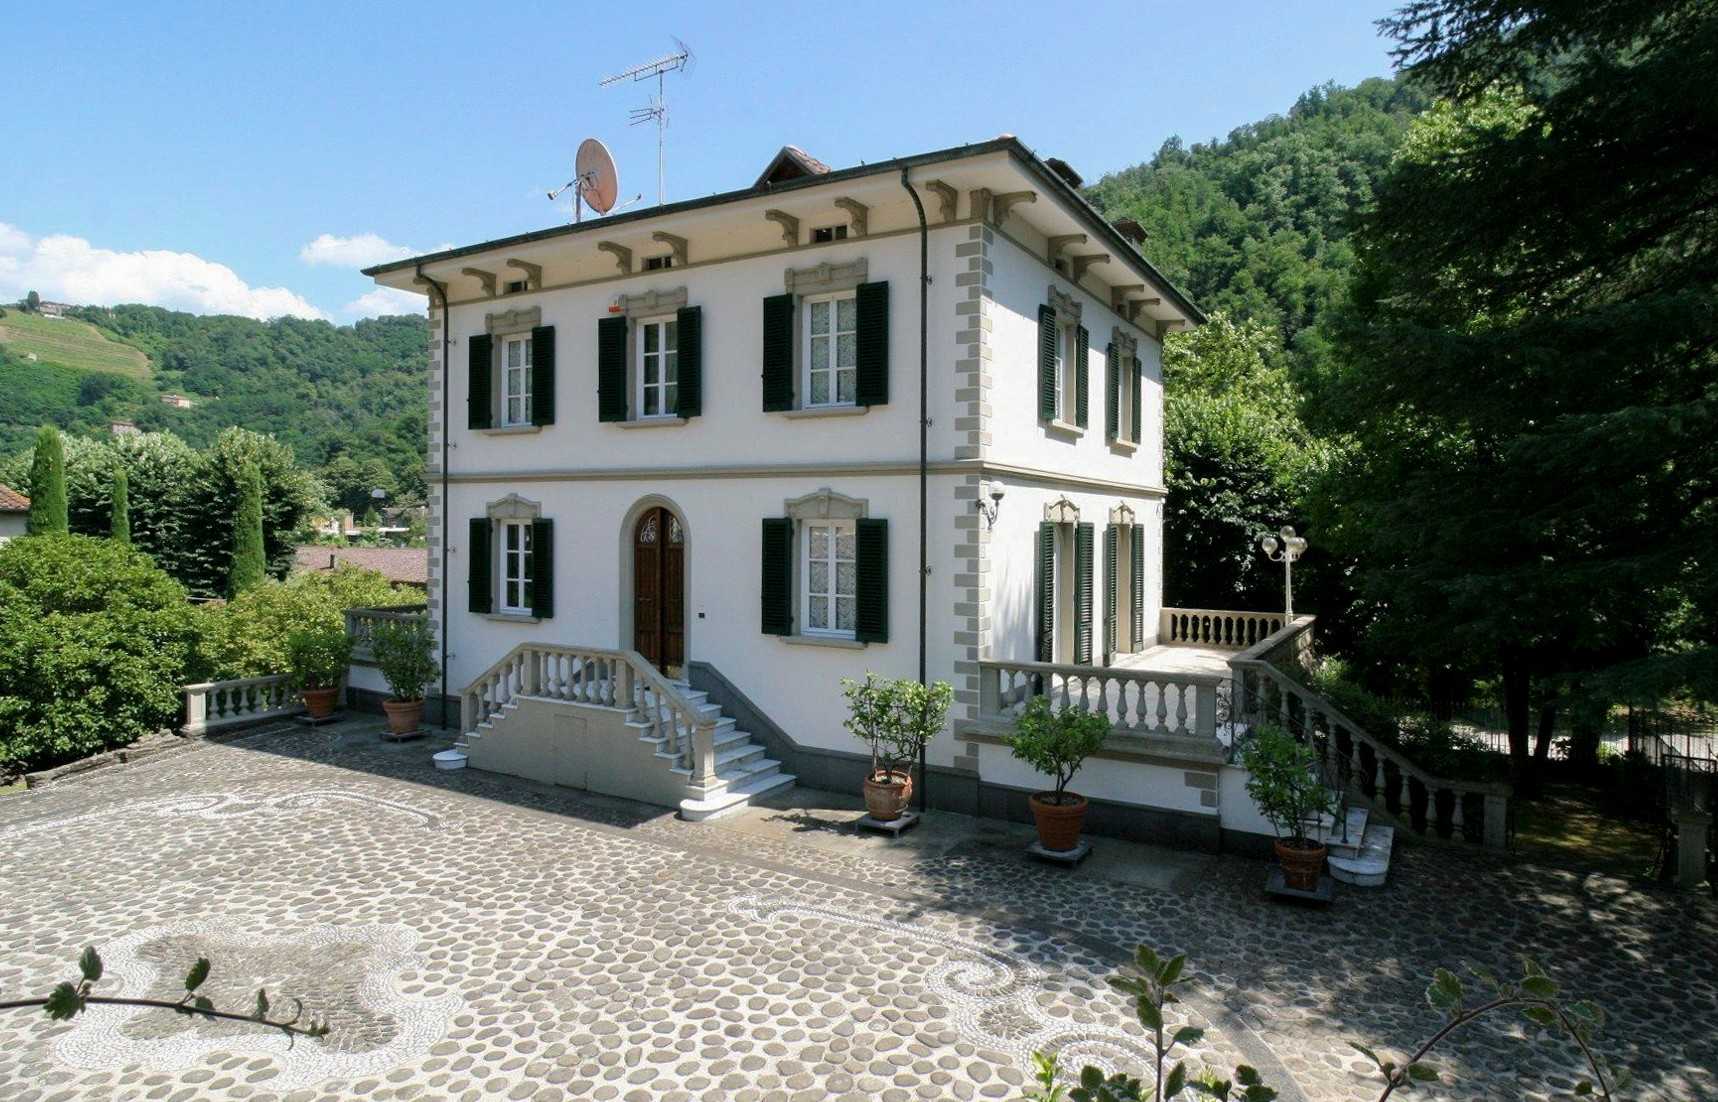 Photos Luxury Tuscany estate in Bagni di Lucca with manor house, farmhouse and park